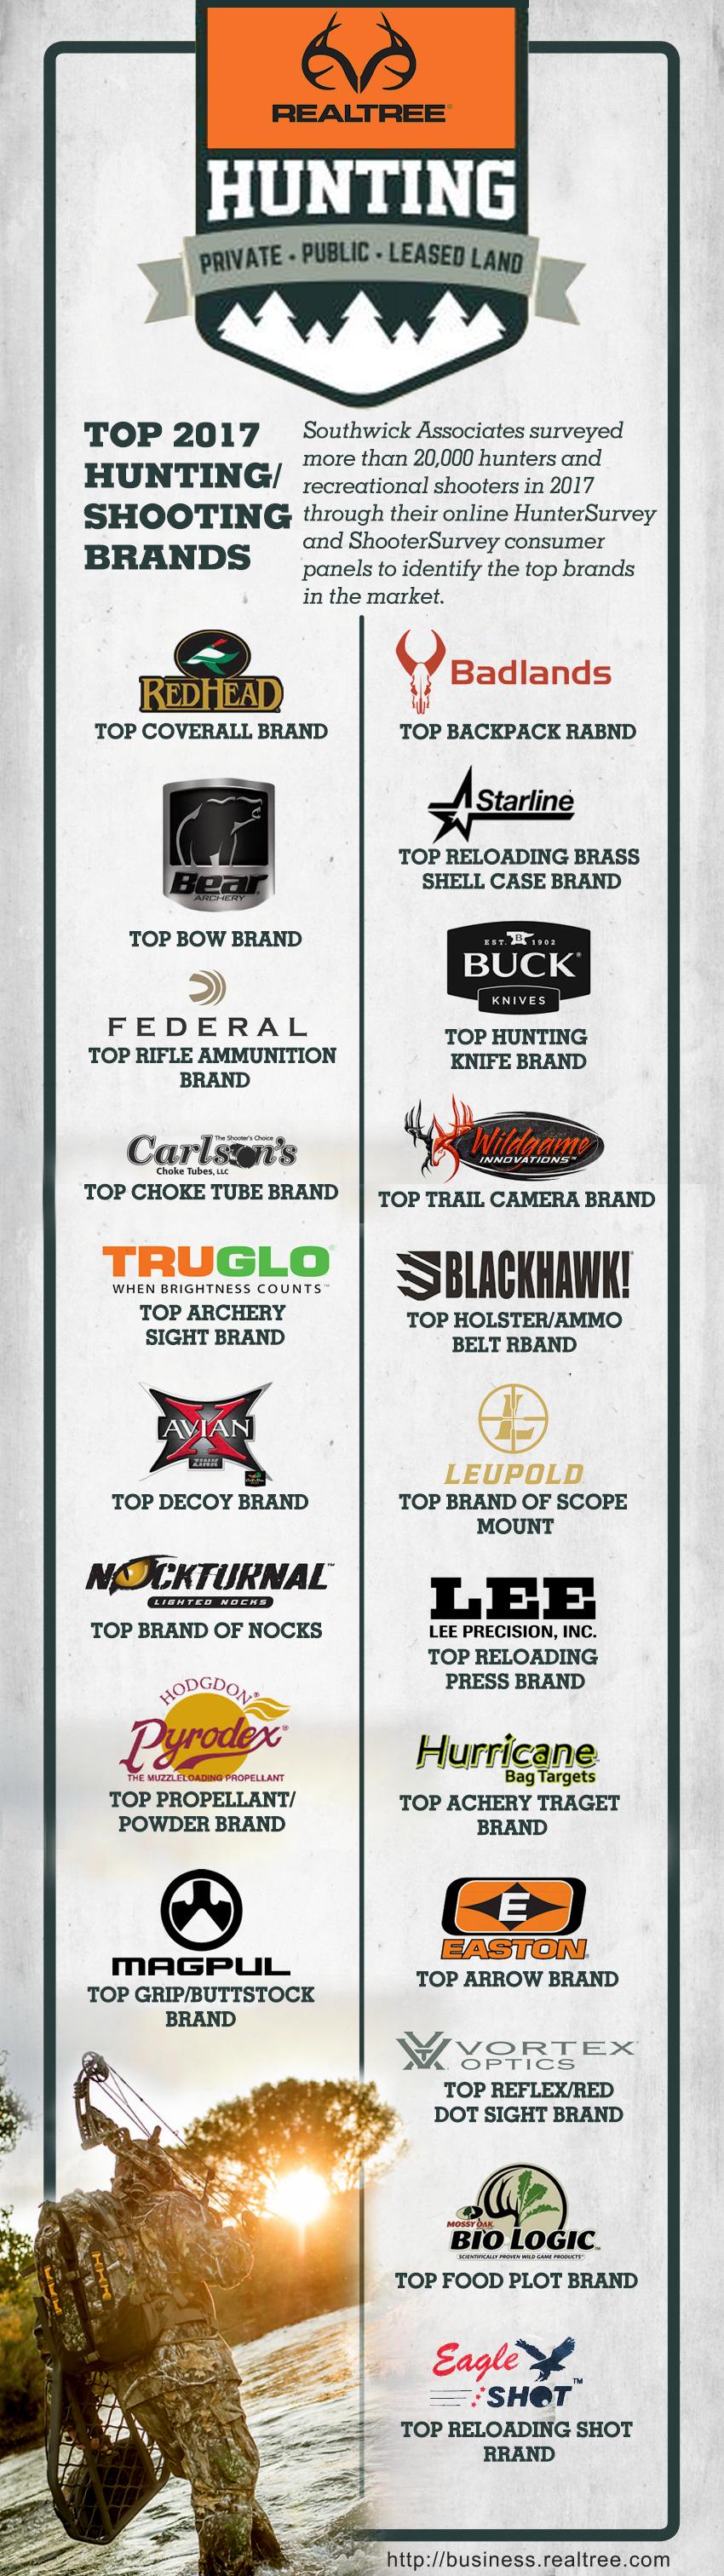 Top Hunting and Shooting Brands in 2017 | Realtree B2B